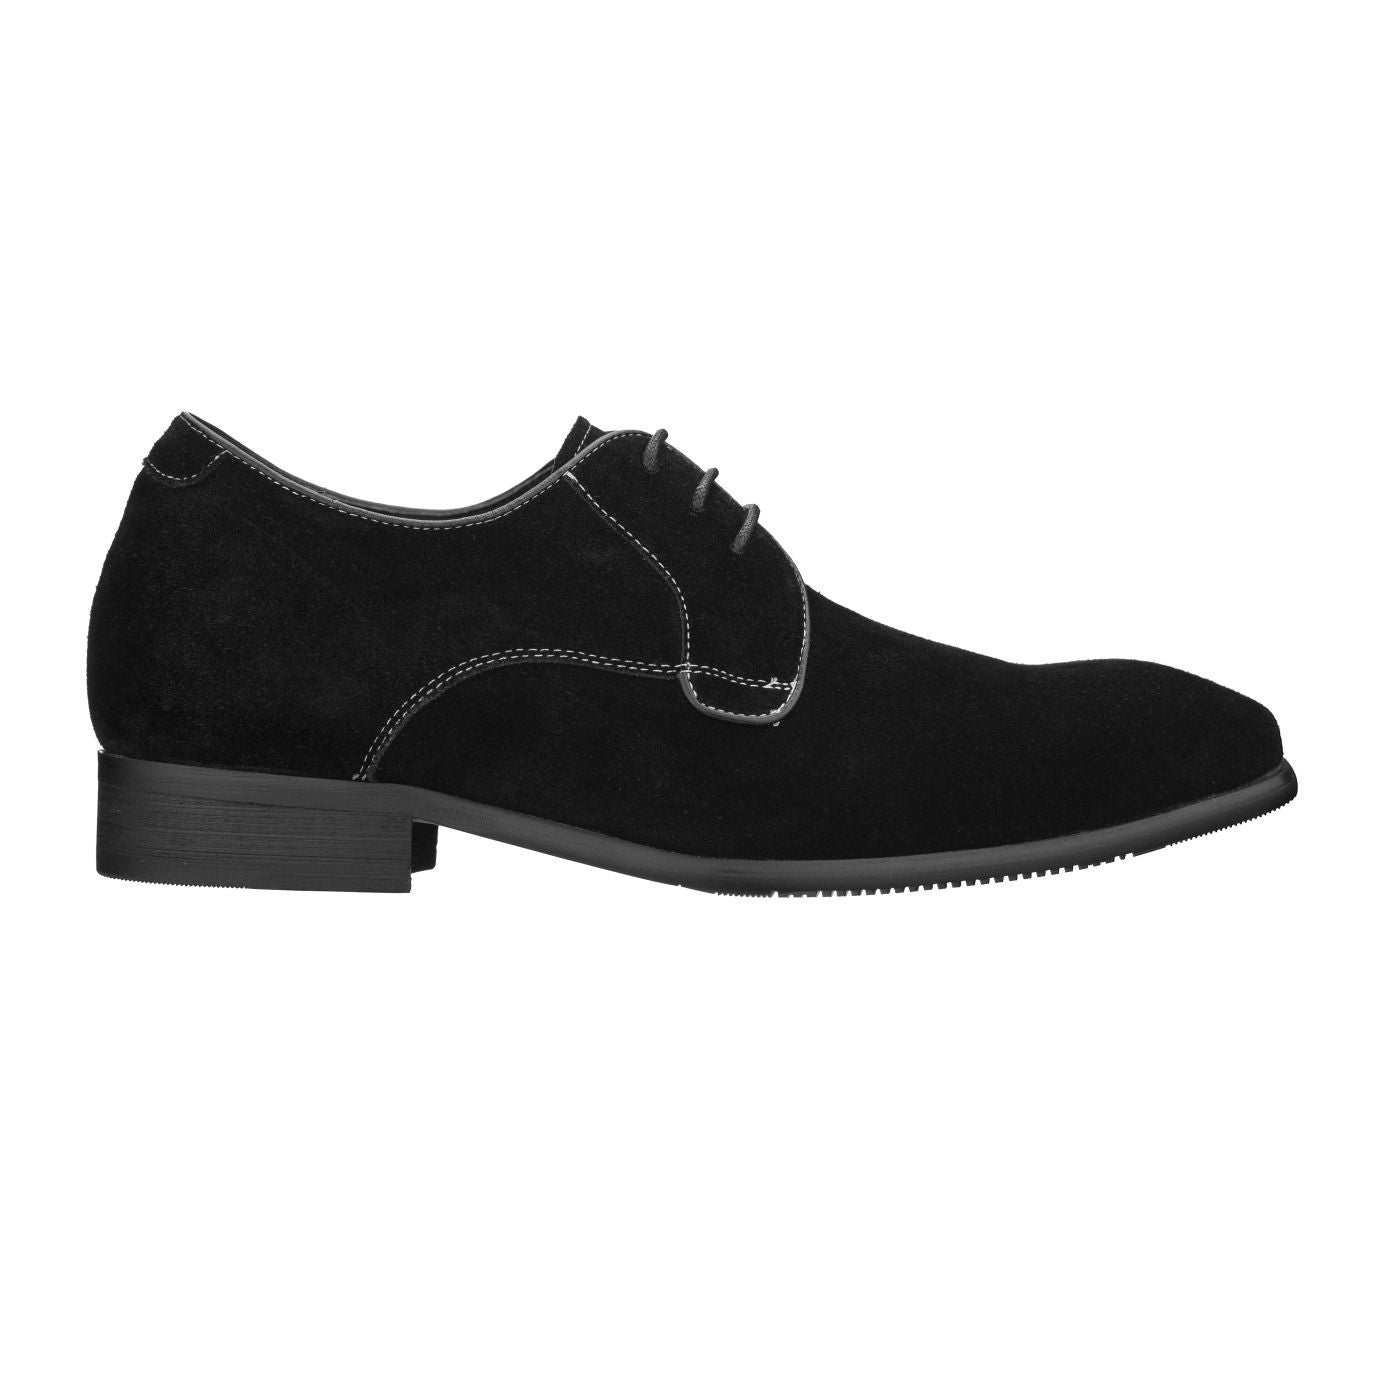 Elevator shoes height increase CALTO 2.4-Inch Taller Black Suede Elevator Dress Shoes Y6001